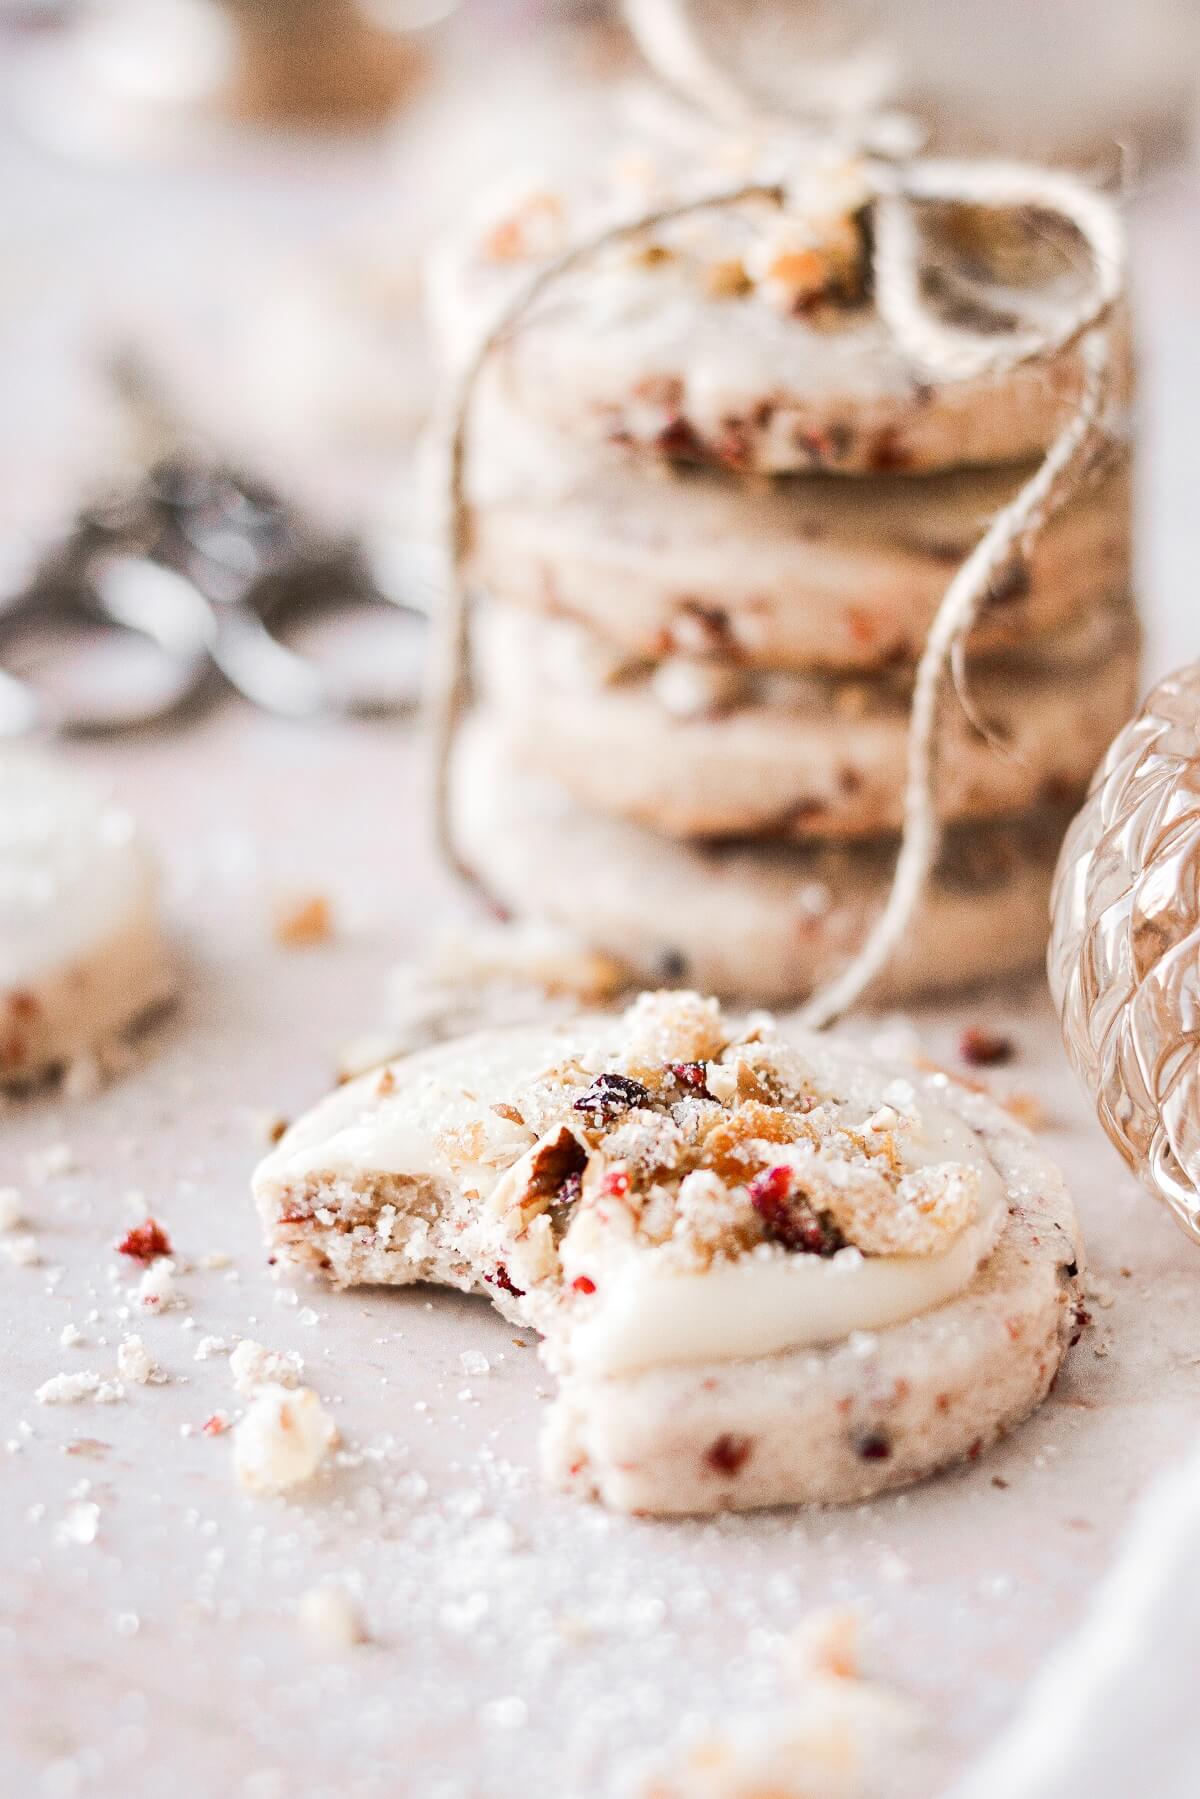 A cranberry pecan shortbread cookie with a bite taken.